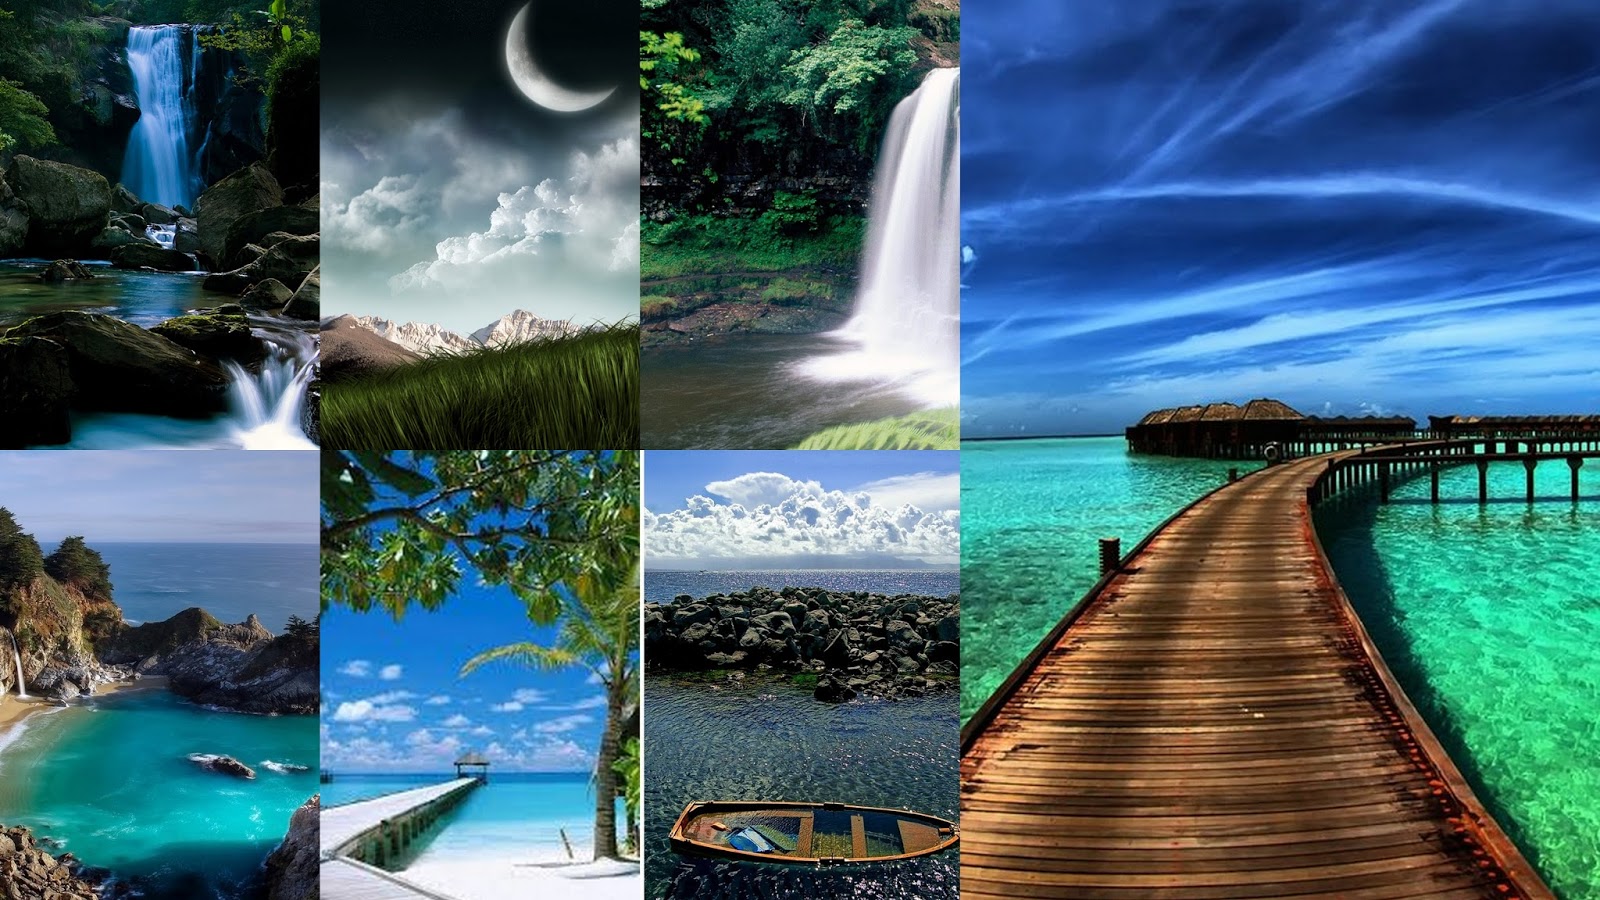 112 Wallpaper Hd Nature Pack Pictures - MyWeb